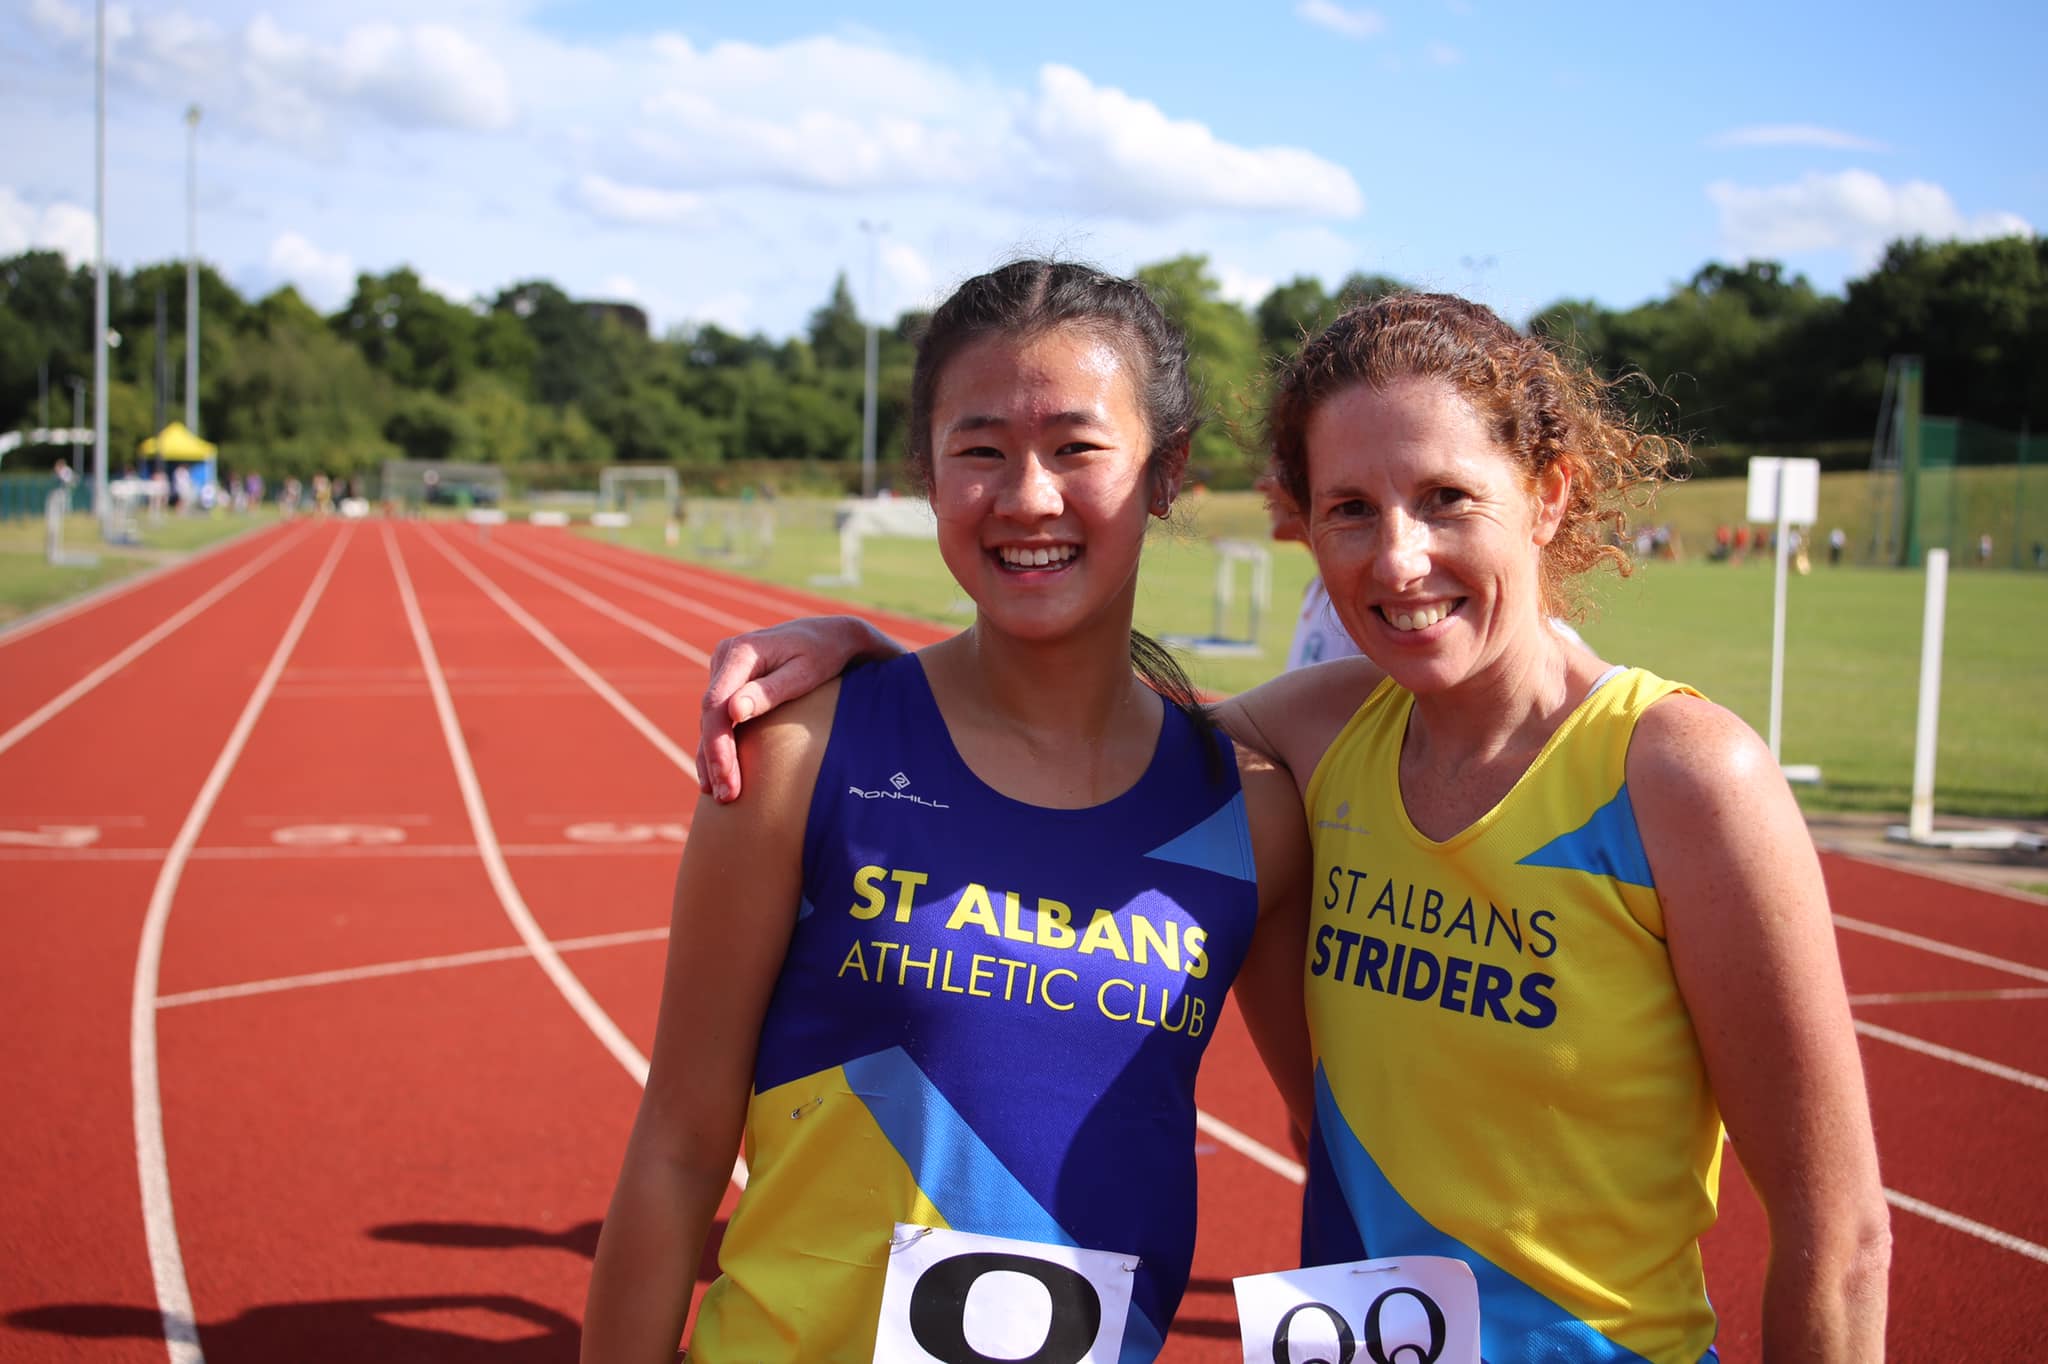 Team mates Lily Tse (left) and Kate Dixon compete at the Abbey View Community Athletics Track